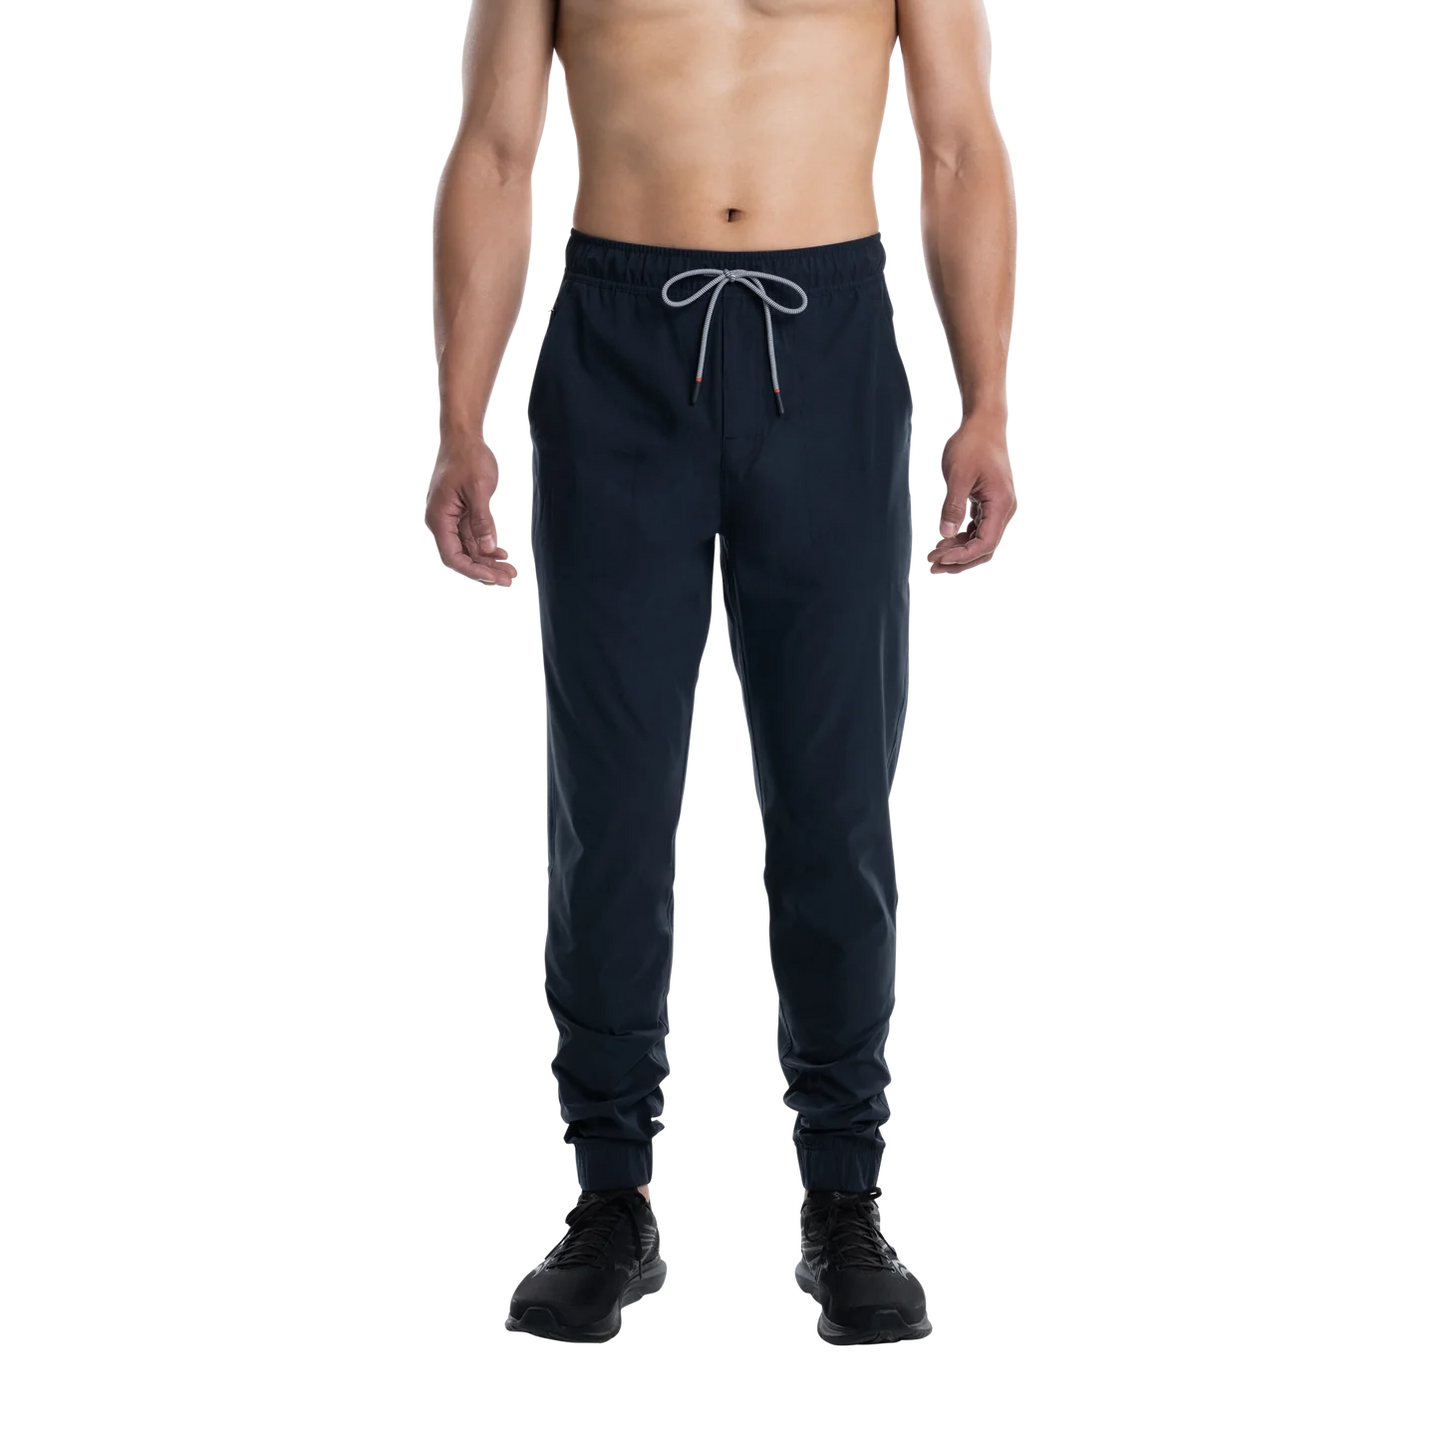 SAXX GO TO TOWN CASUAL SPORT Pants / Black